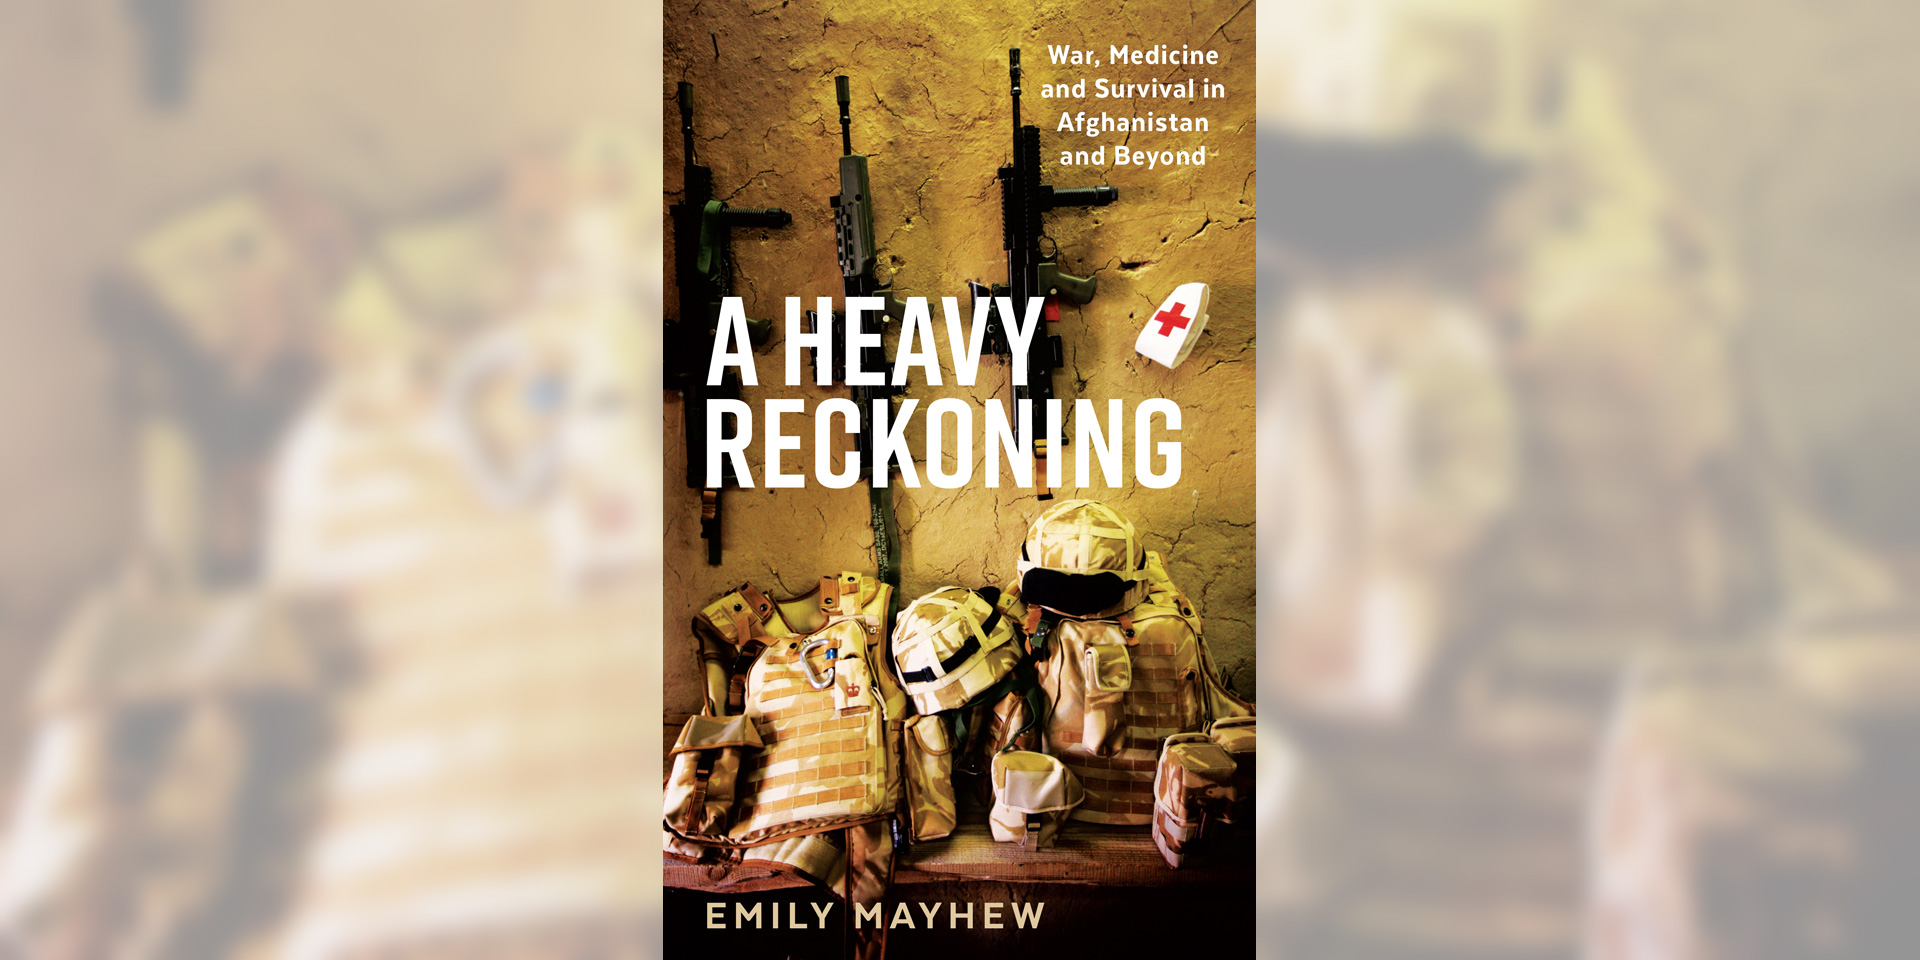 A Heavy Reckoning book cover